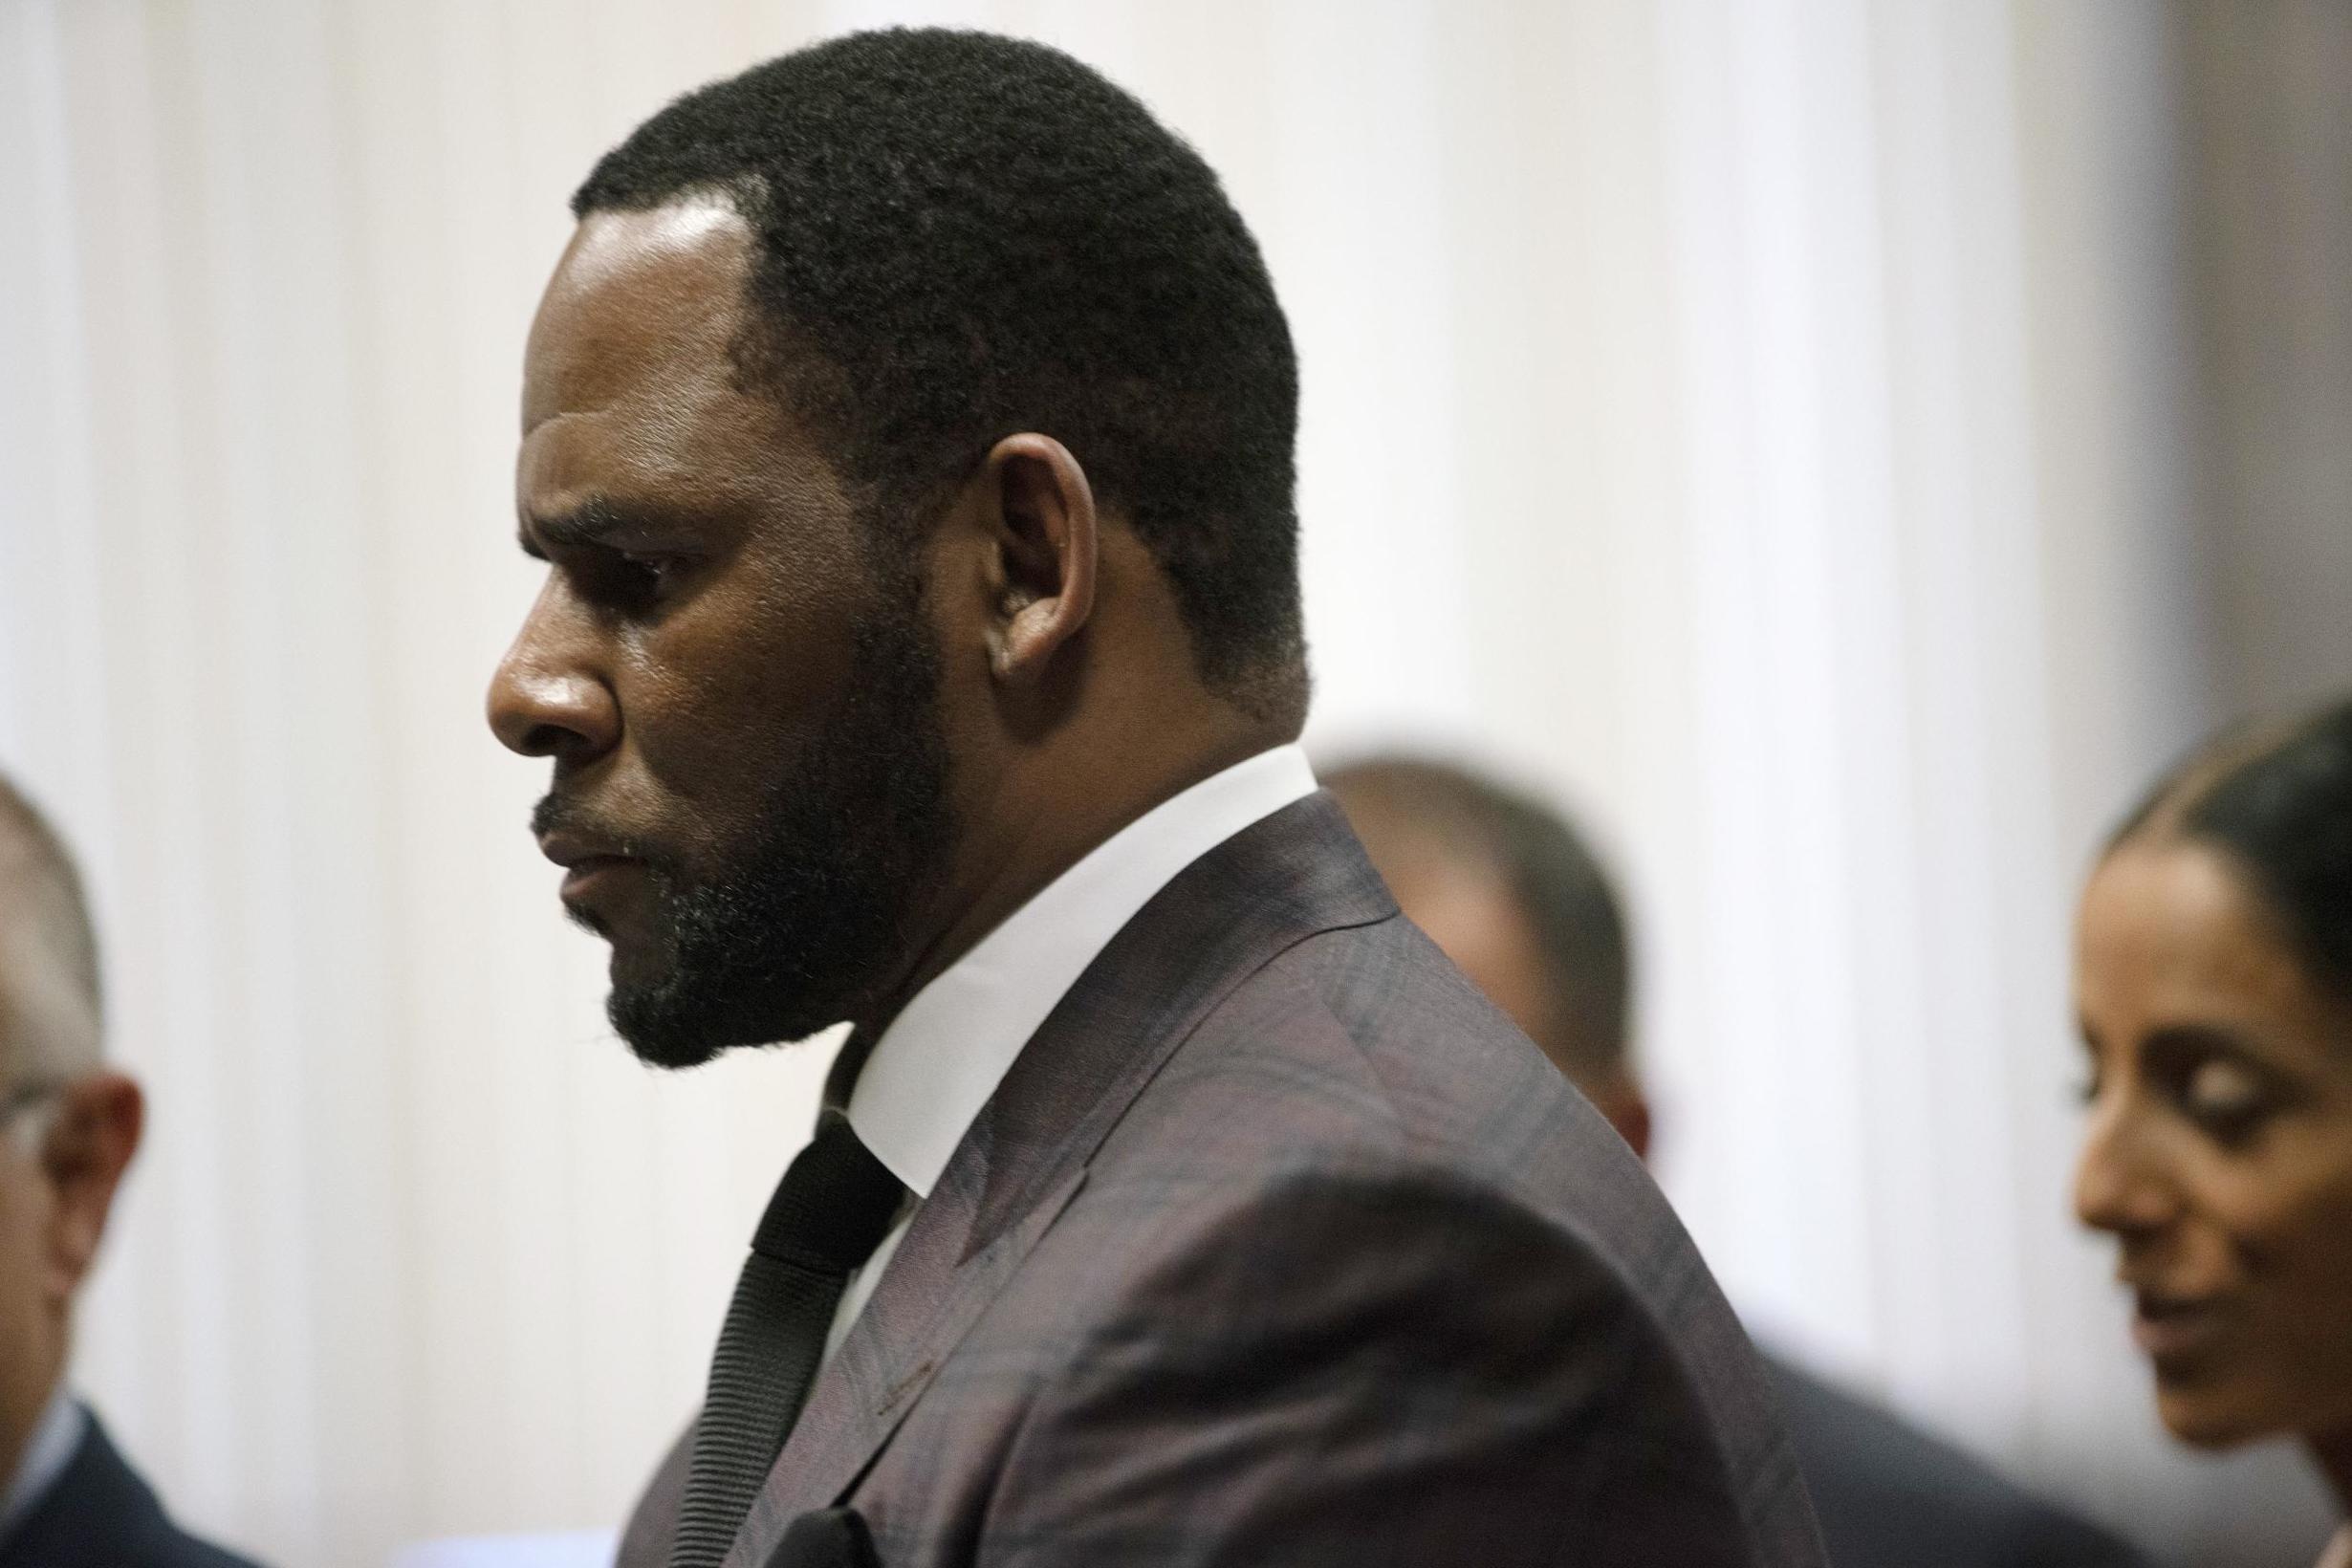 R. Kelly losses bid to be released from jail over Coronavirus pandemic